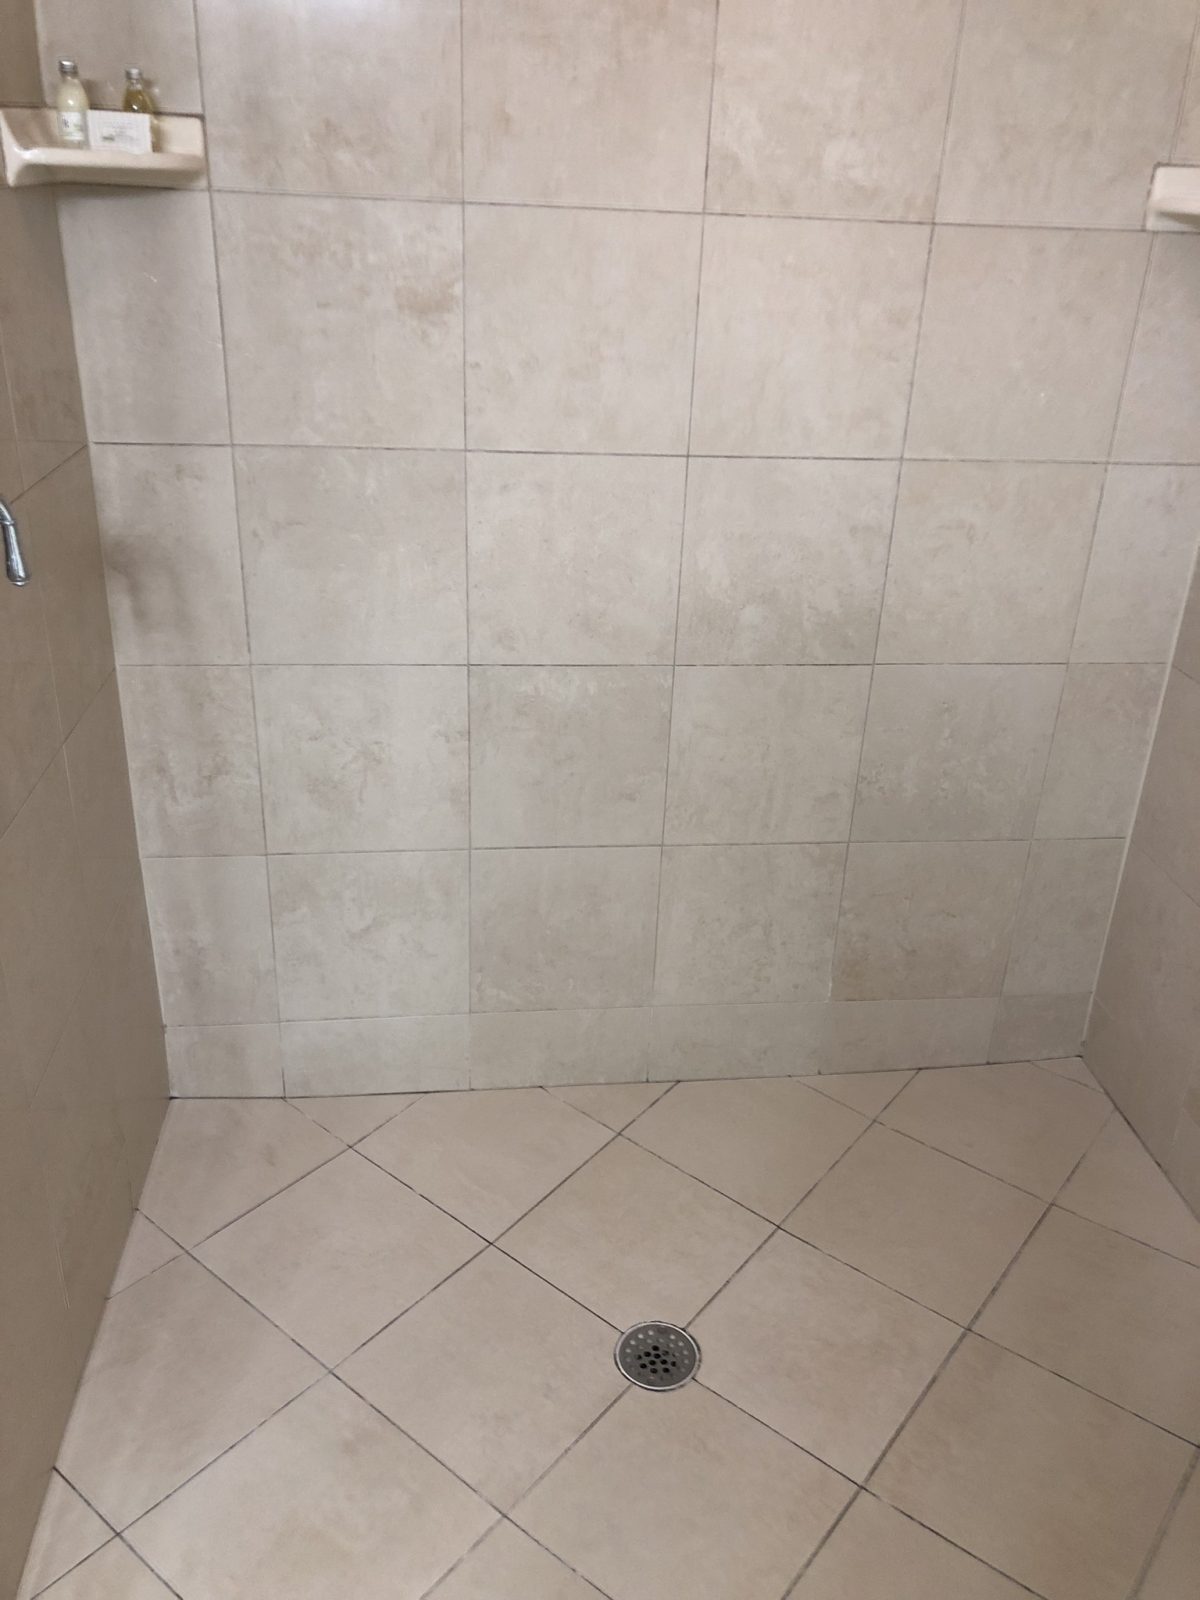 Professional Tile & Grout Cleaning Cincinnati Ohio by Howards Cleaning Service